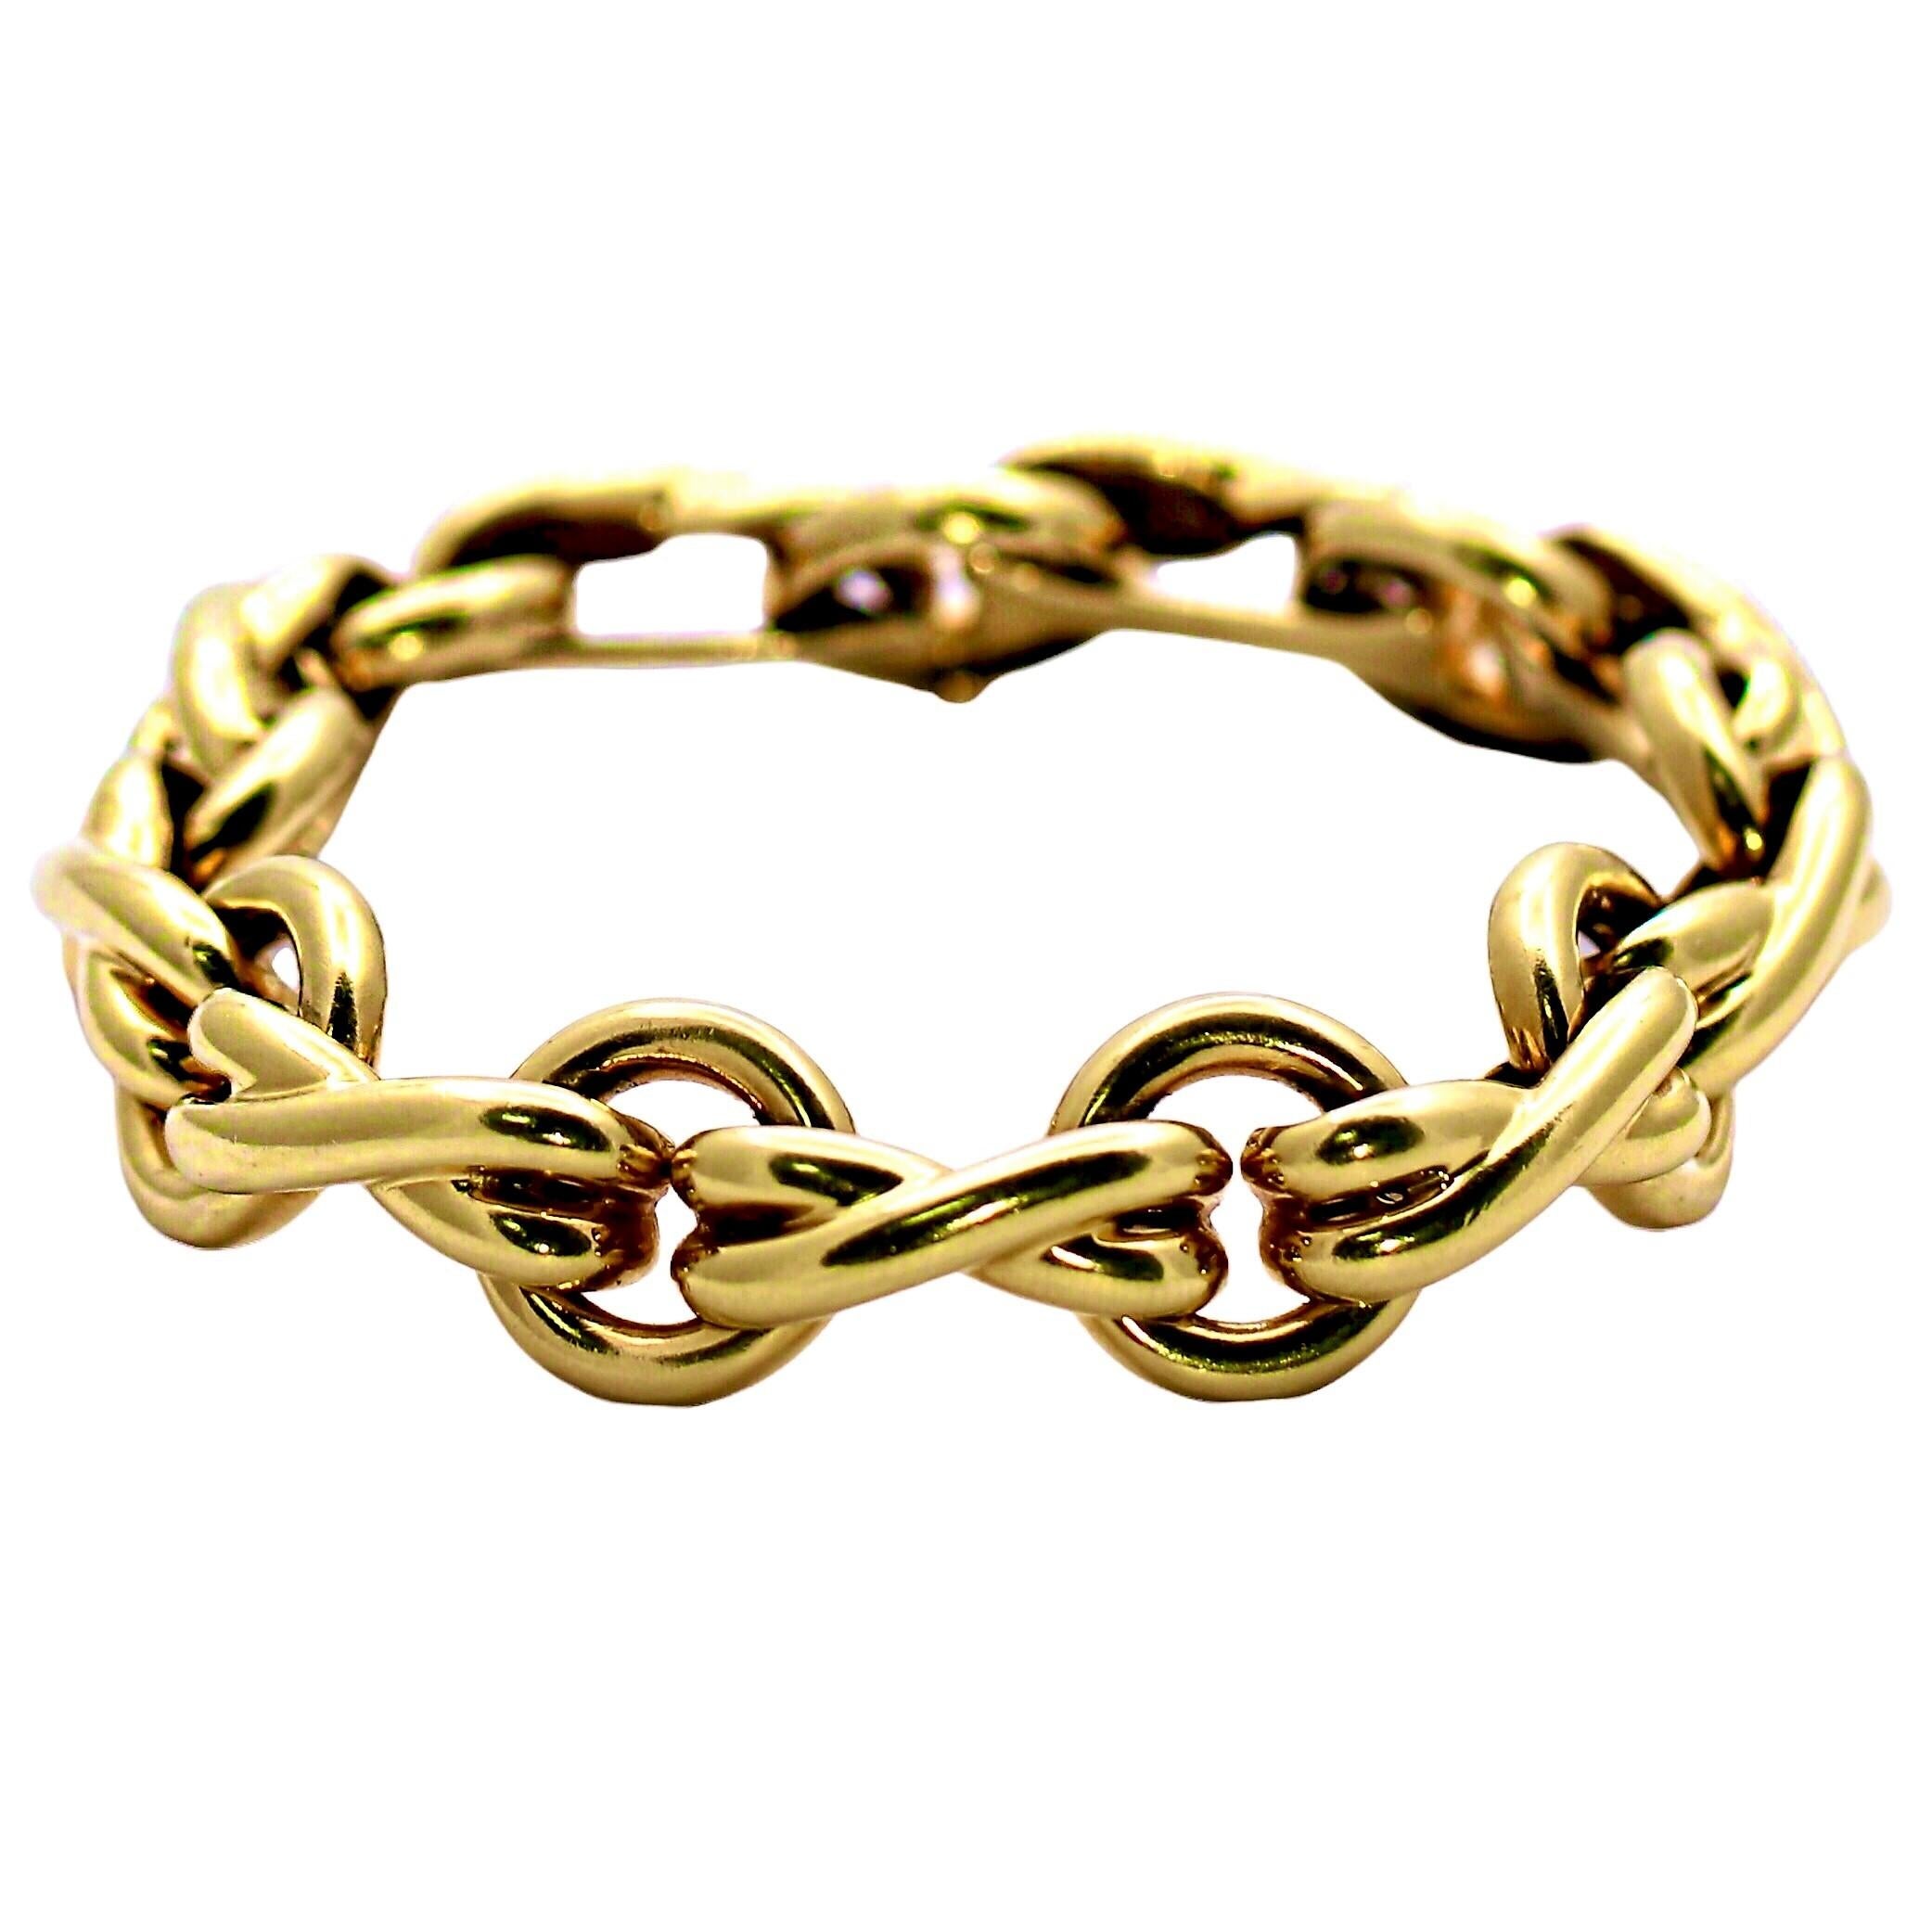 This lovely and and somewhat whimsical 18K yellow gold Tiffany bracelet was imagined by highly regarded jewelry designer, Paloma Picasso. It's repeating X and O links depict a stylized take on the symbolism traditionally used for kisses and hugs.